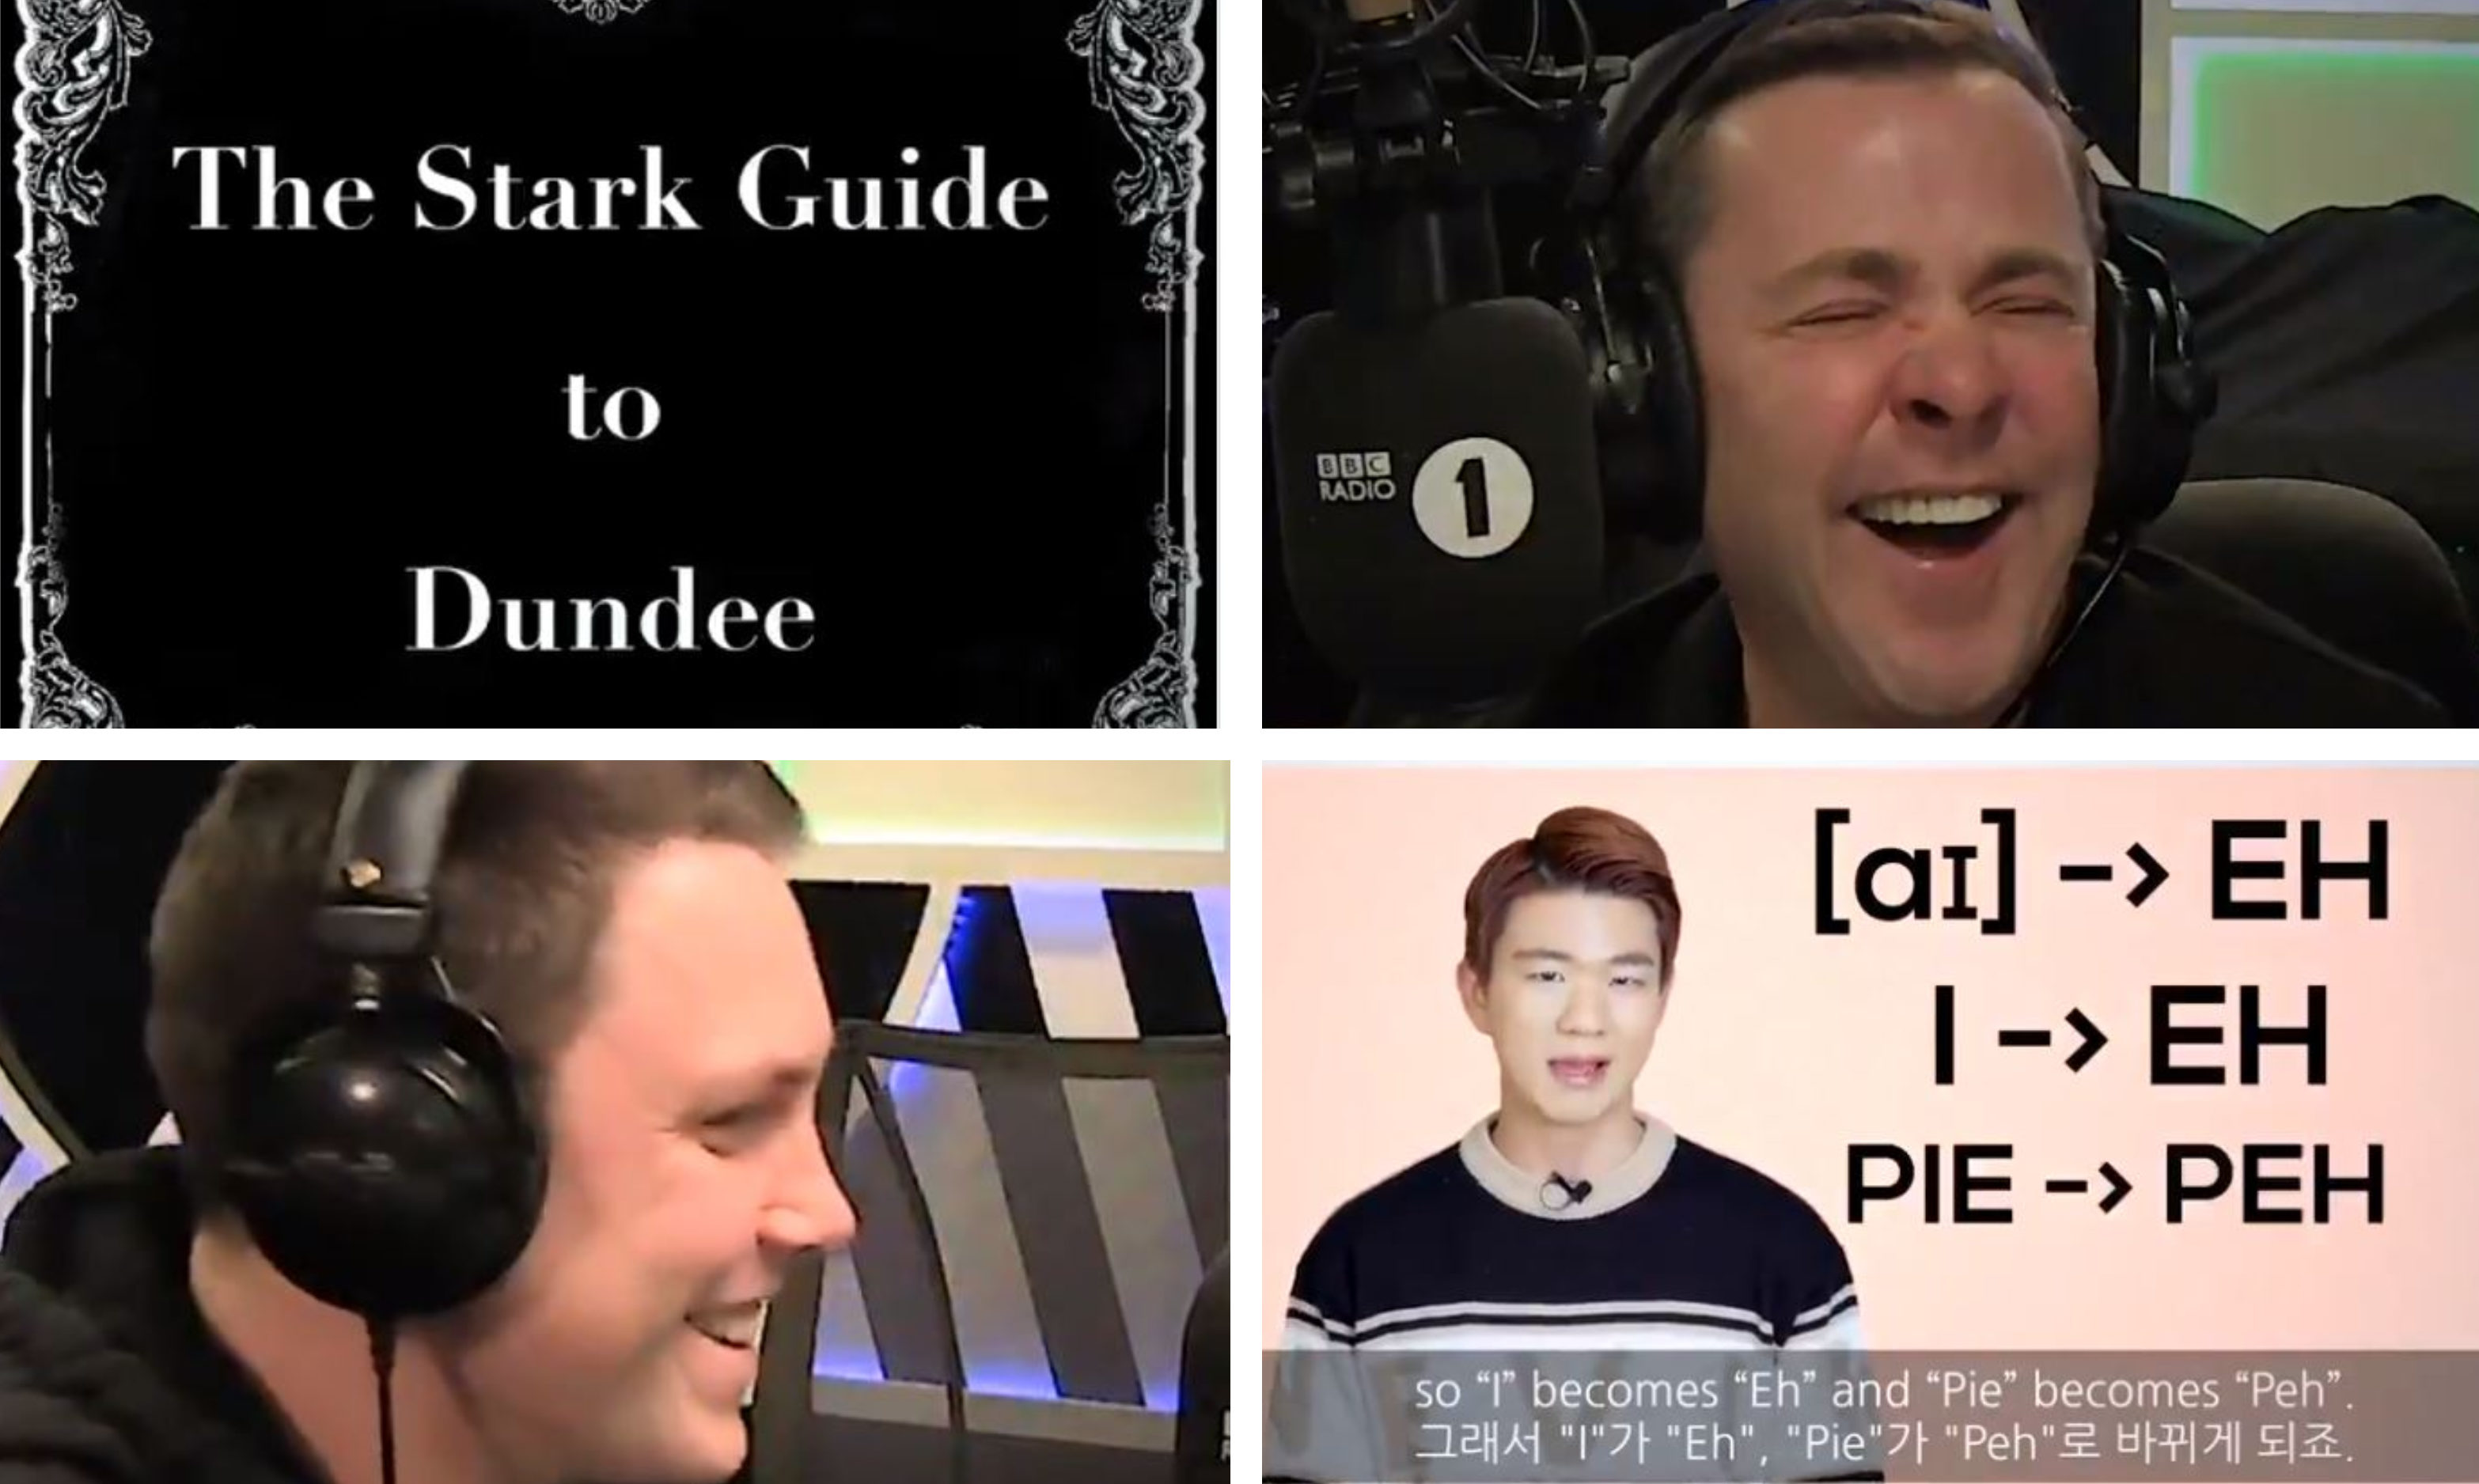 Chris Stark (bottom left) and Scott Mills (top right) on air as The Stark Guide to Dundee is read out.